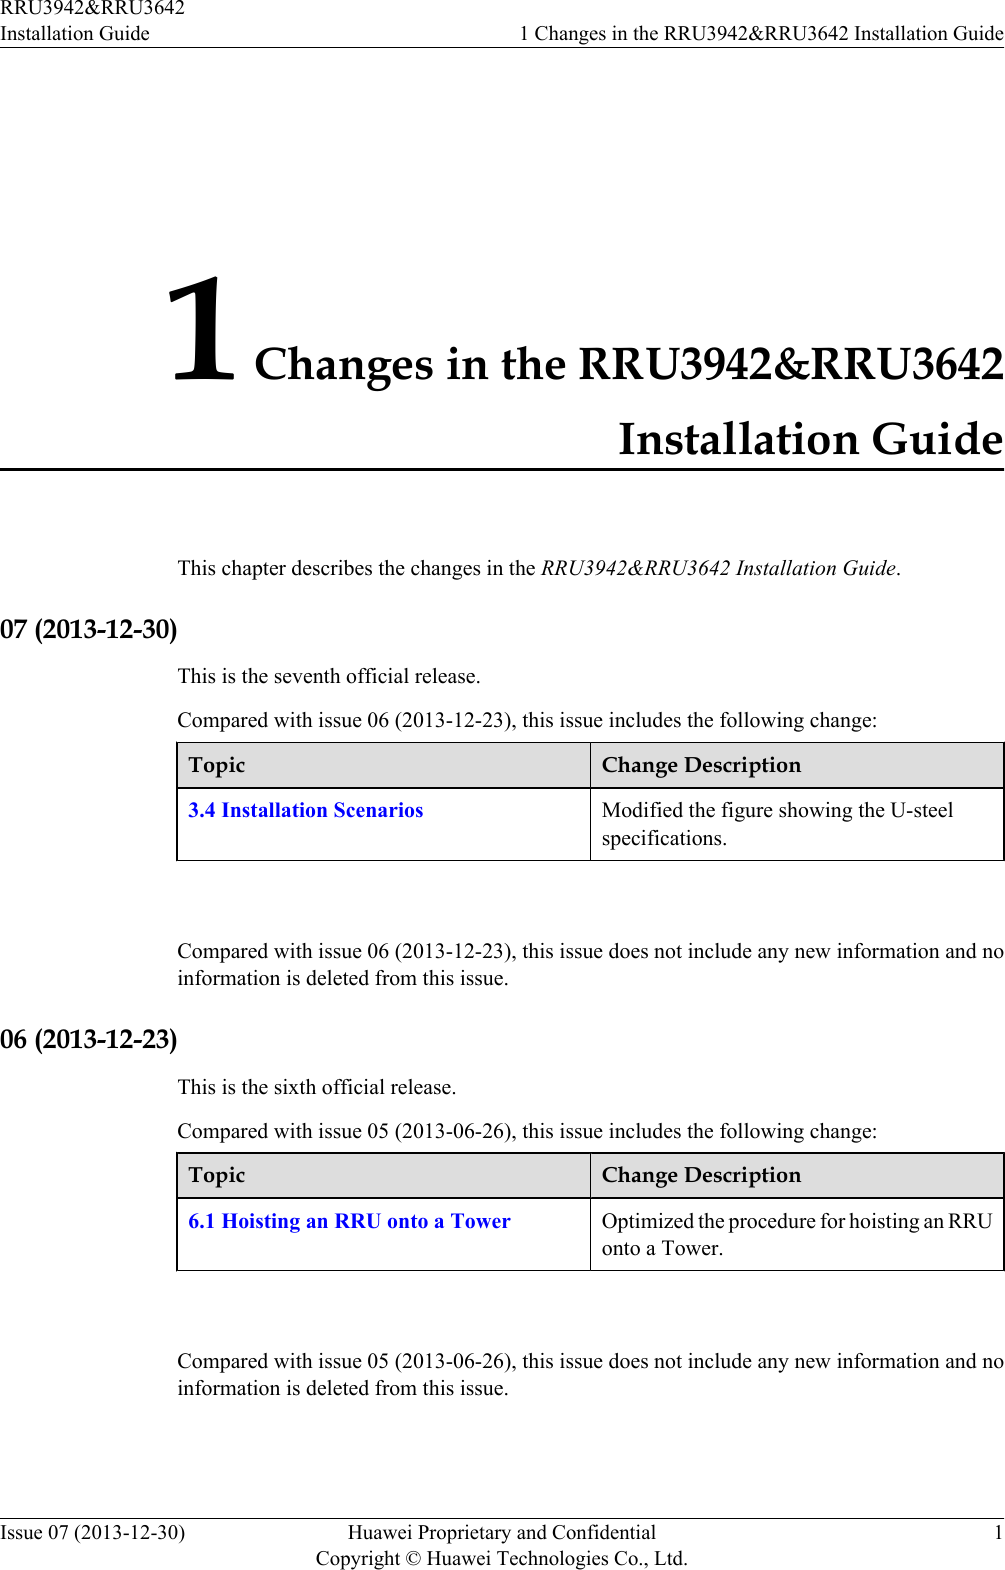 1 Changes in the RRU3942&amp;RRU3642Installation GuideThis chapter describes the changes in the RRU3942&amp;RRU3642 Installation Guide.07 (2013-12-30)This is the seventh official release.Compared with issue 06 (2013-12-23), this issue includes the following change:Topic Change Description3.4 Installation Scenarios Modified the figure showing the U-steelspecifications. Compared with issue 06 (2013-12-23), this issue does not include any new information and noinformation is deleted from this issue.06 (2013-12-23)This is the sixth official release.Compared with issue 05 (2013-06-26), this issue includes the following change:Topic Change Description6.1 Hoisting an RRU onto a Tower Optimized the procedure for hoisting an RRUonto a Tower. Compared with issue 05 (2013-06-26), this issue does not include any new information and noinformation is deleted from this issue.RRU3942&amp;RRU3642Installation Guide 1 Changes in the RRU3942&amp;RRU3642 Installation GuideIssue 07 (2013-12-30) Huawei Proprietary and ConfidentialCopyright © Huawei Technologies Co., Ltd.1